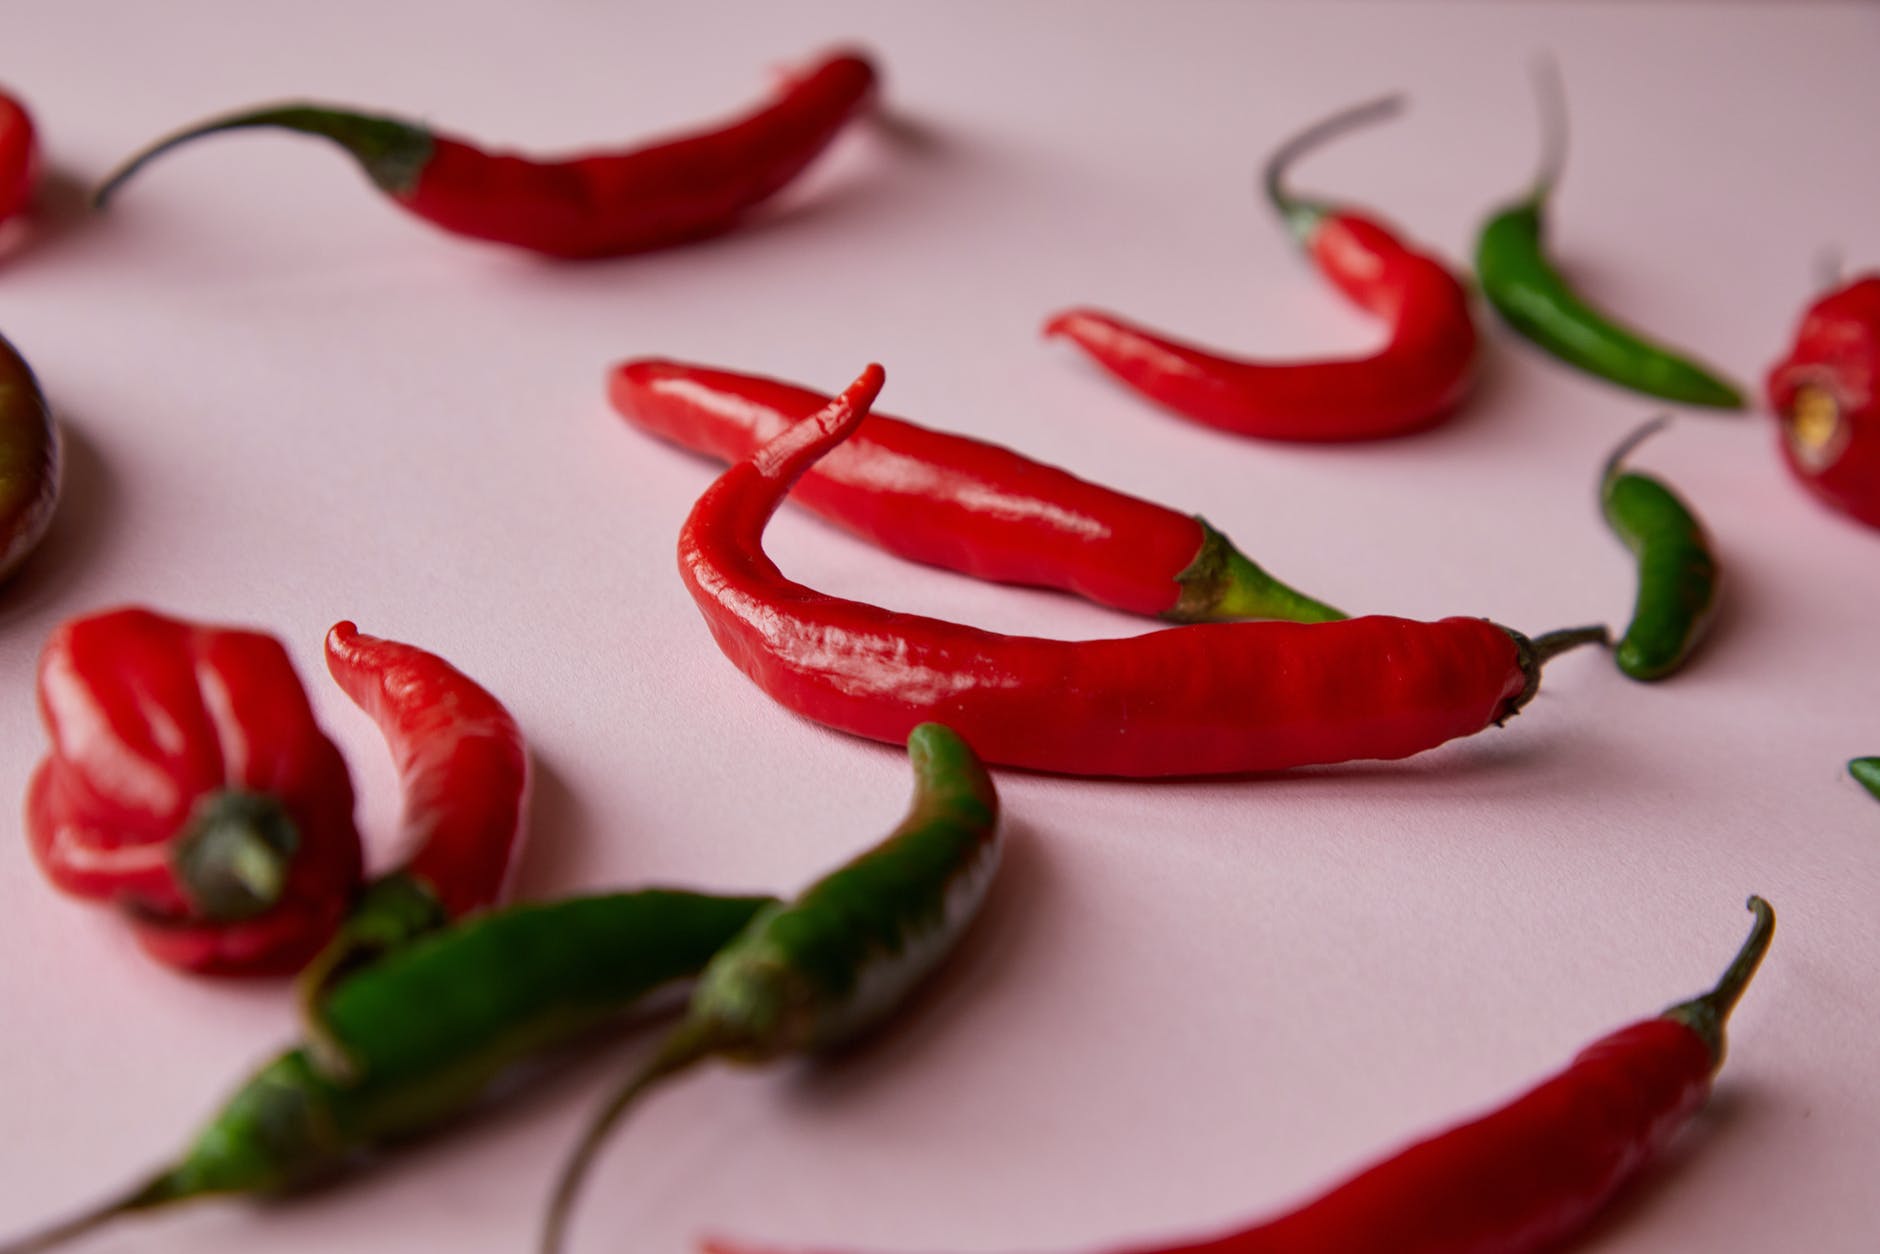 Wellness with Spices: 3 Weight Loss Benefits of Red Chilies